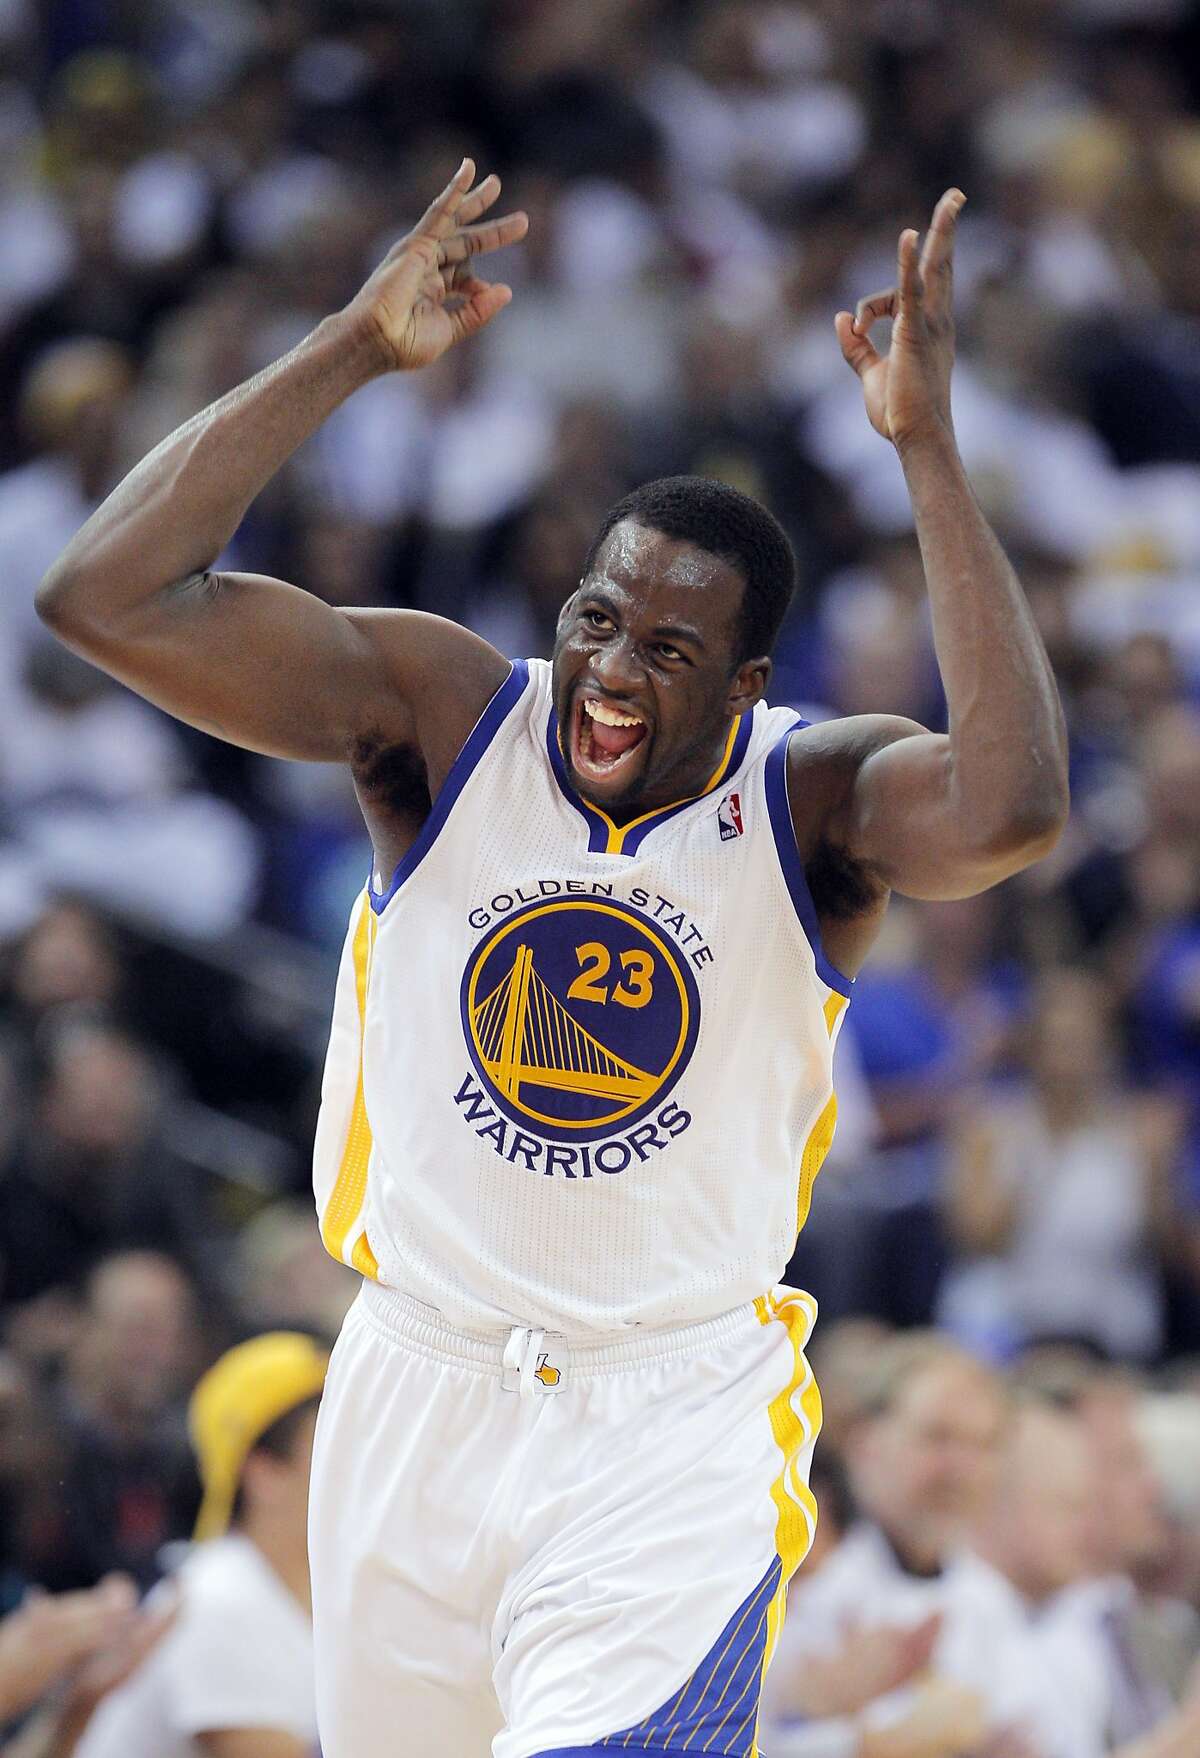 Draymond Green (23) reacts after hitting a three-point shot in the second half. The Golden State Warriors played the Minnesota Timberwolves at Oracle Arena in Oakland, Calif., on Monday, April 14, 2014.